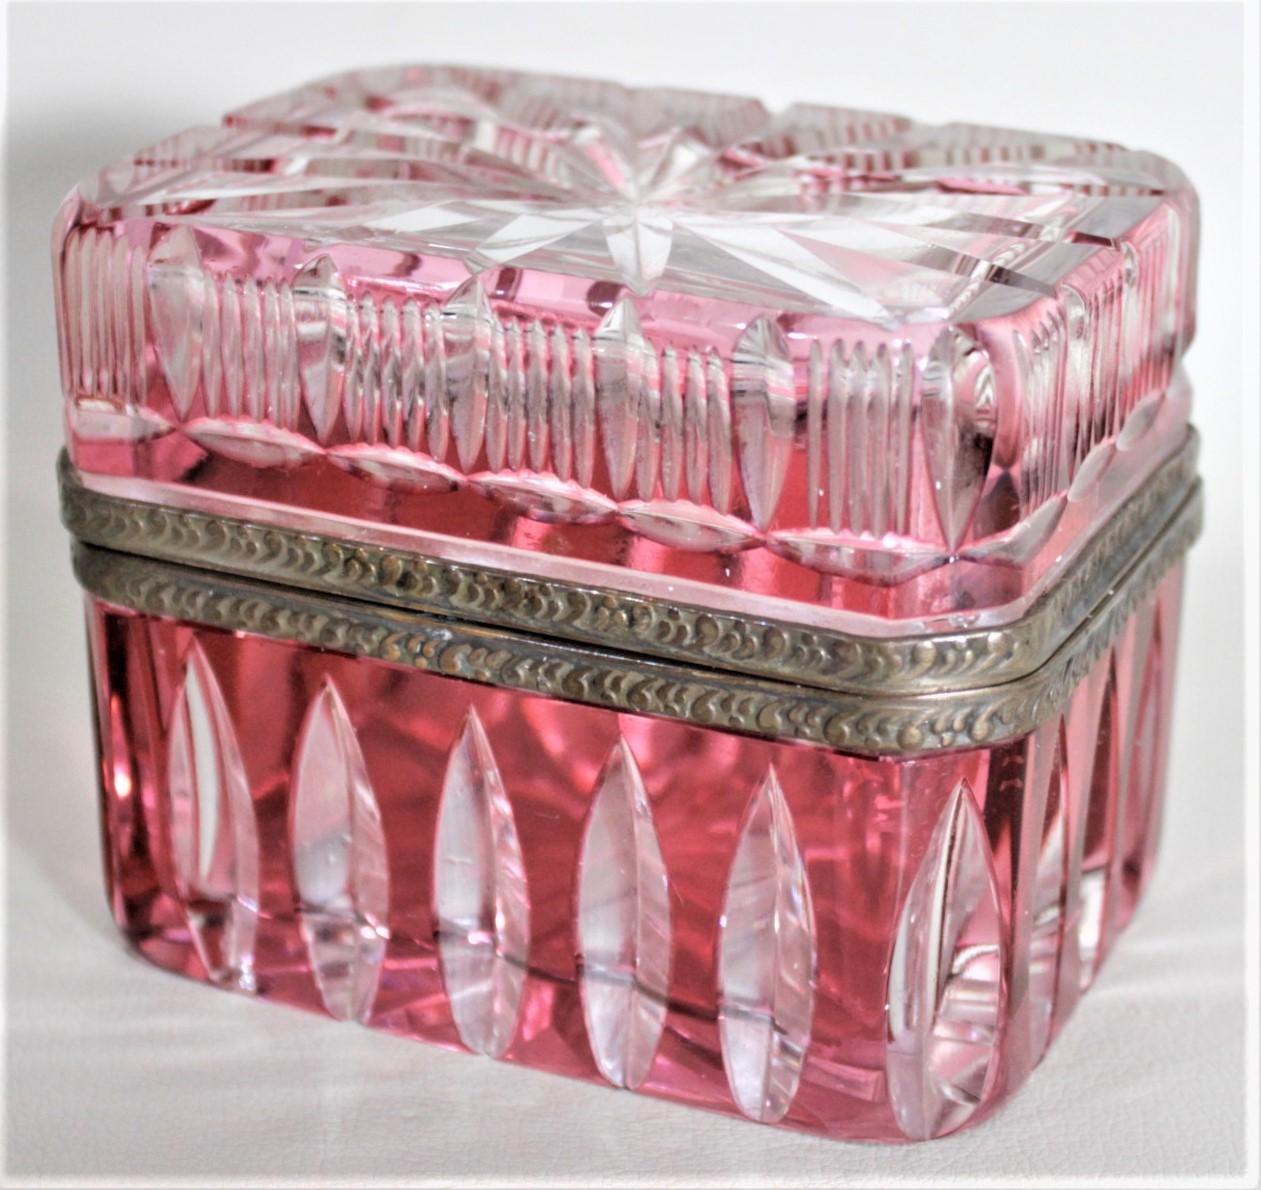 This nicely executed glass jewelry casket or box was most likely made in Bohemia, now the Czech Republic in circa 1920. The top and bottom of the box are done with a ruby colored glass cased over clear glass which have been handcut to give the